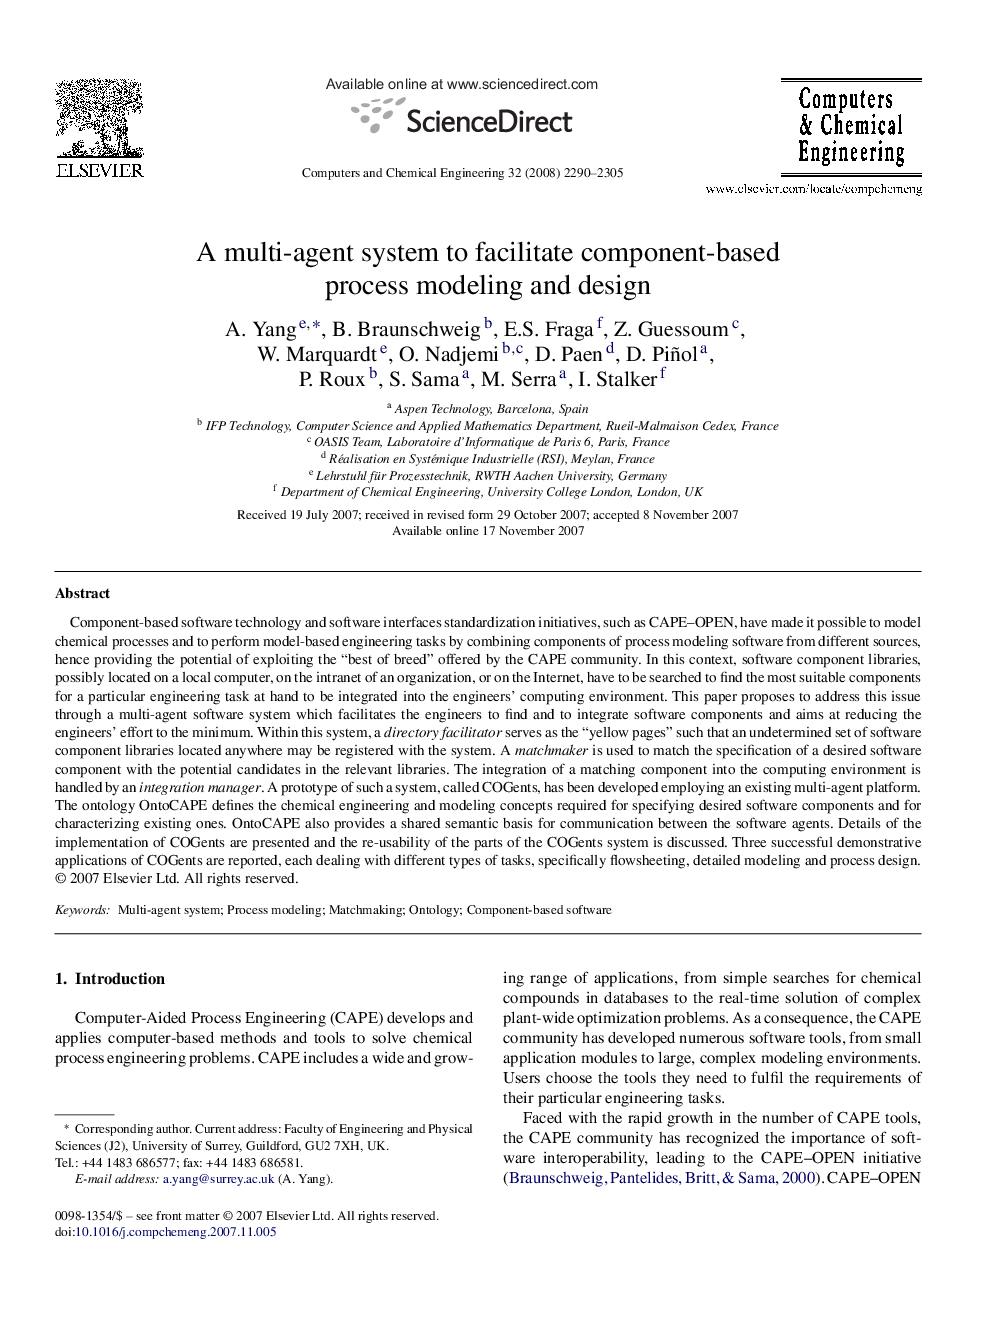 A multi-agent system to facilitate component-based process modeling and design